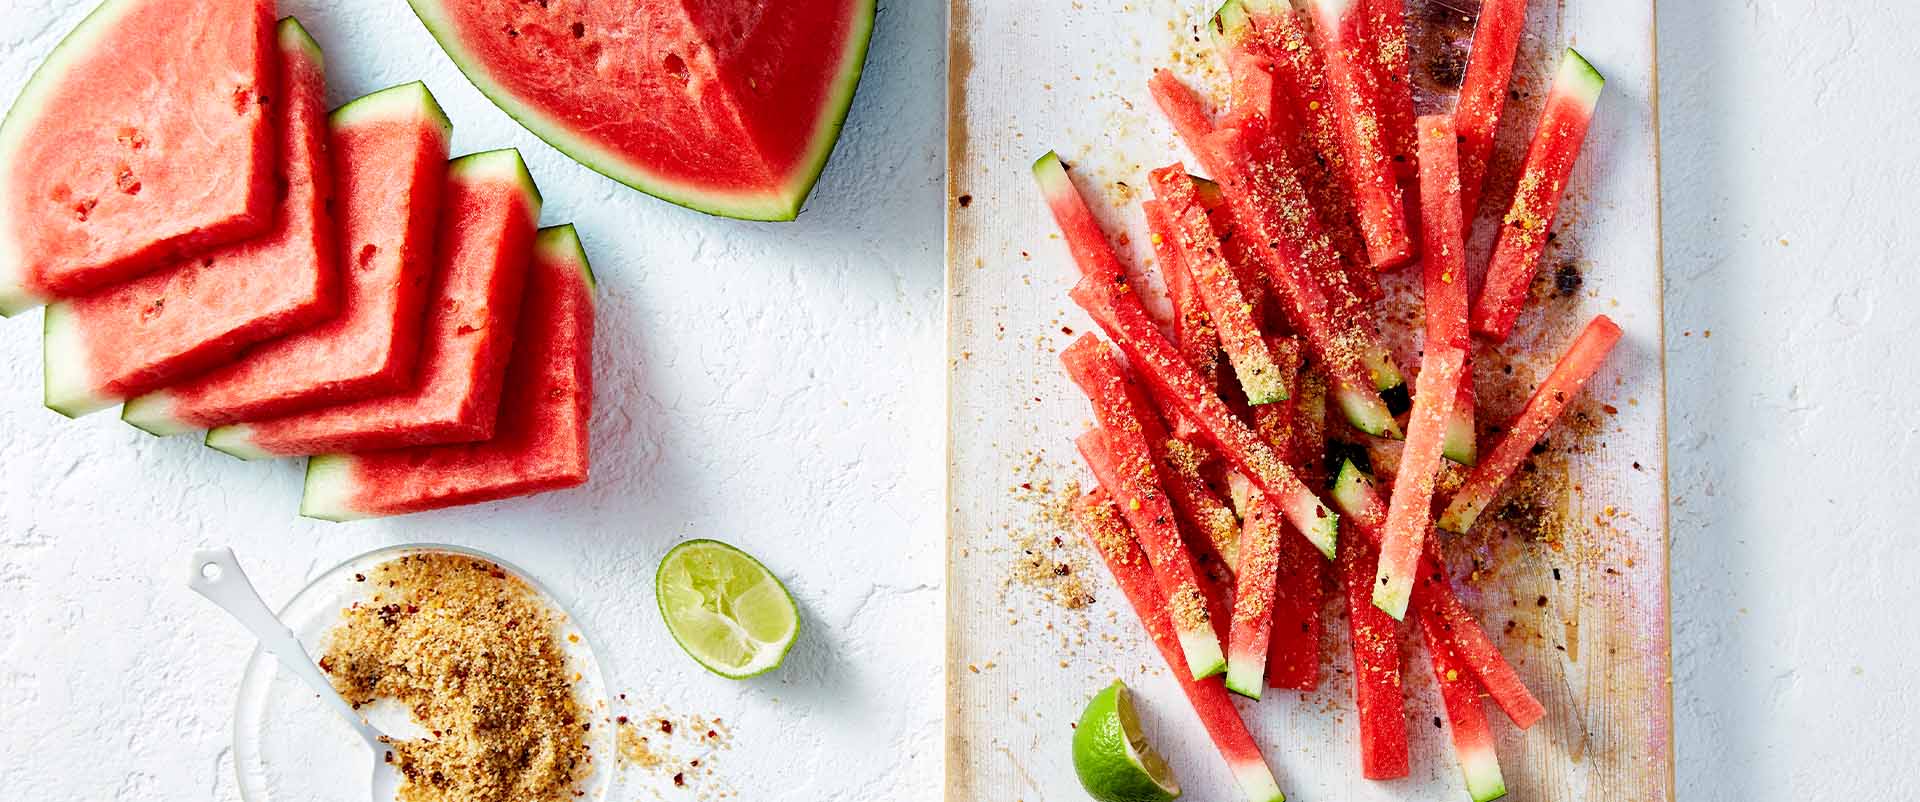 WATERMELON FRIES WITH LIME & COCONUT SALT Recipe 